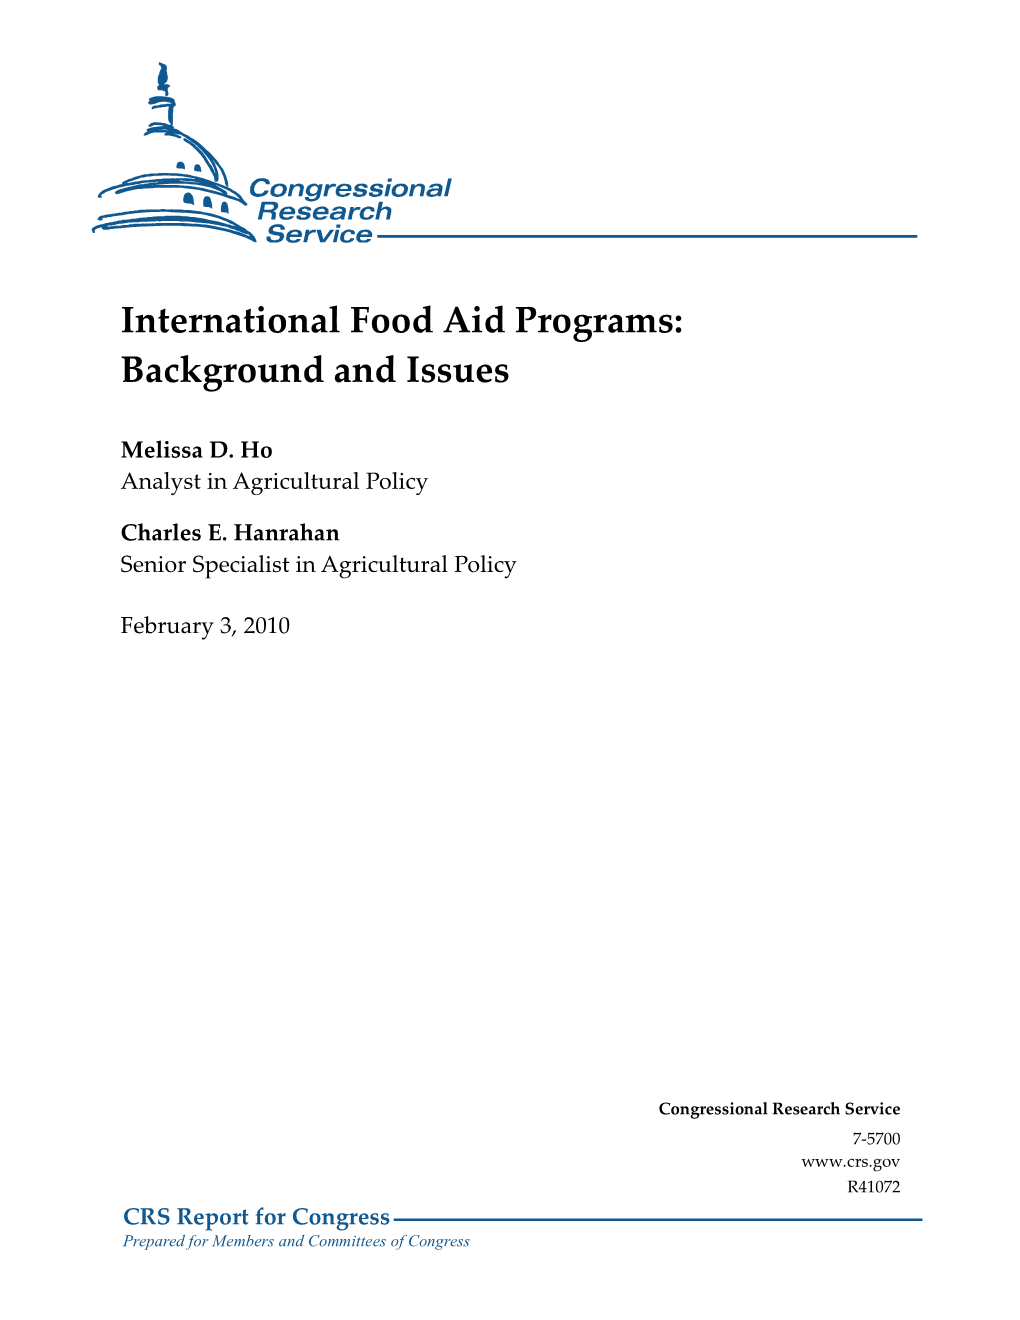 International Food Aid Programs: Background and Issues